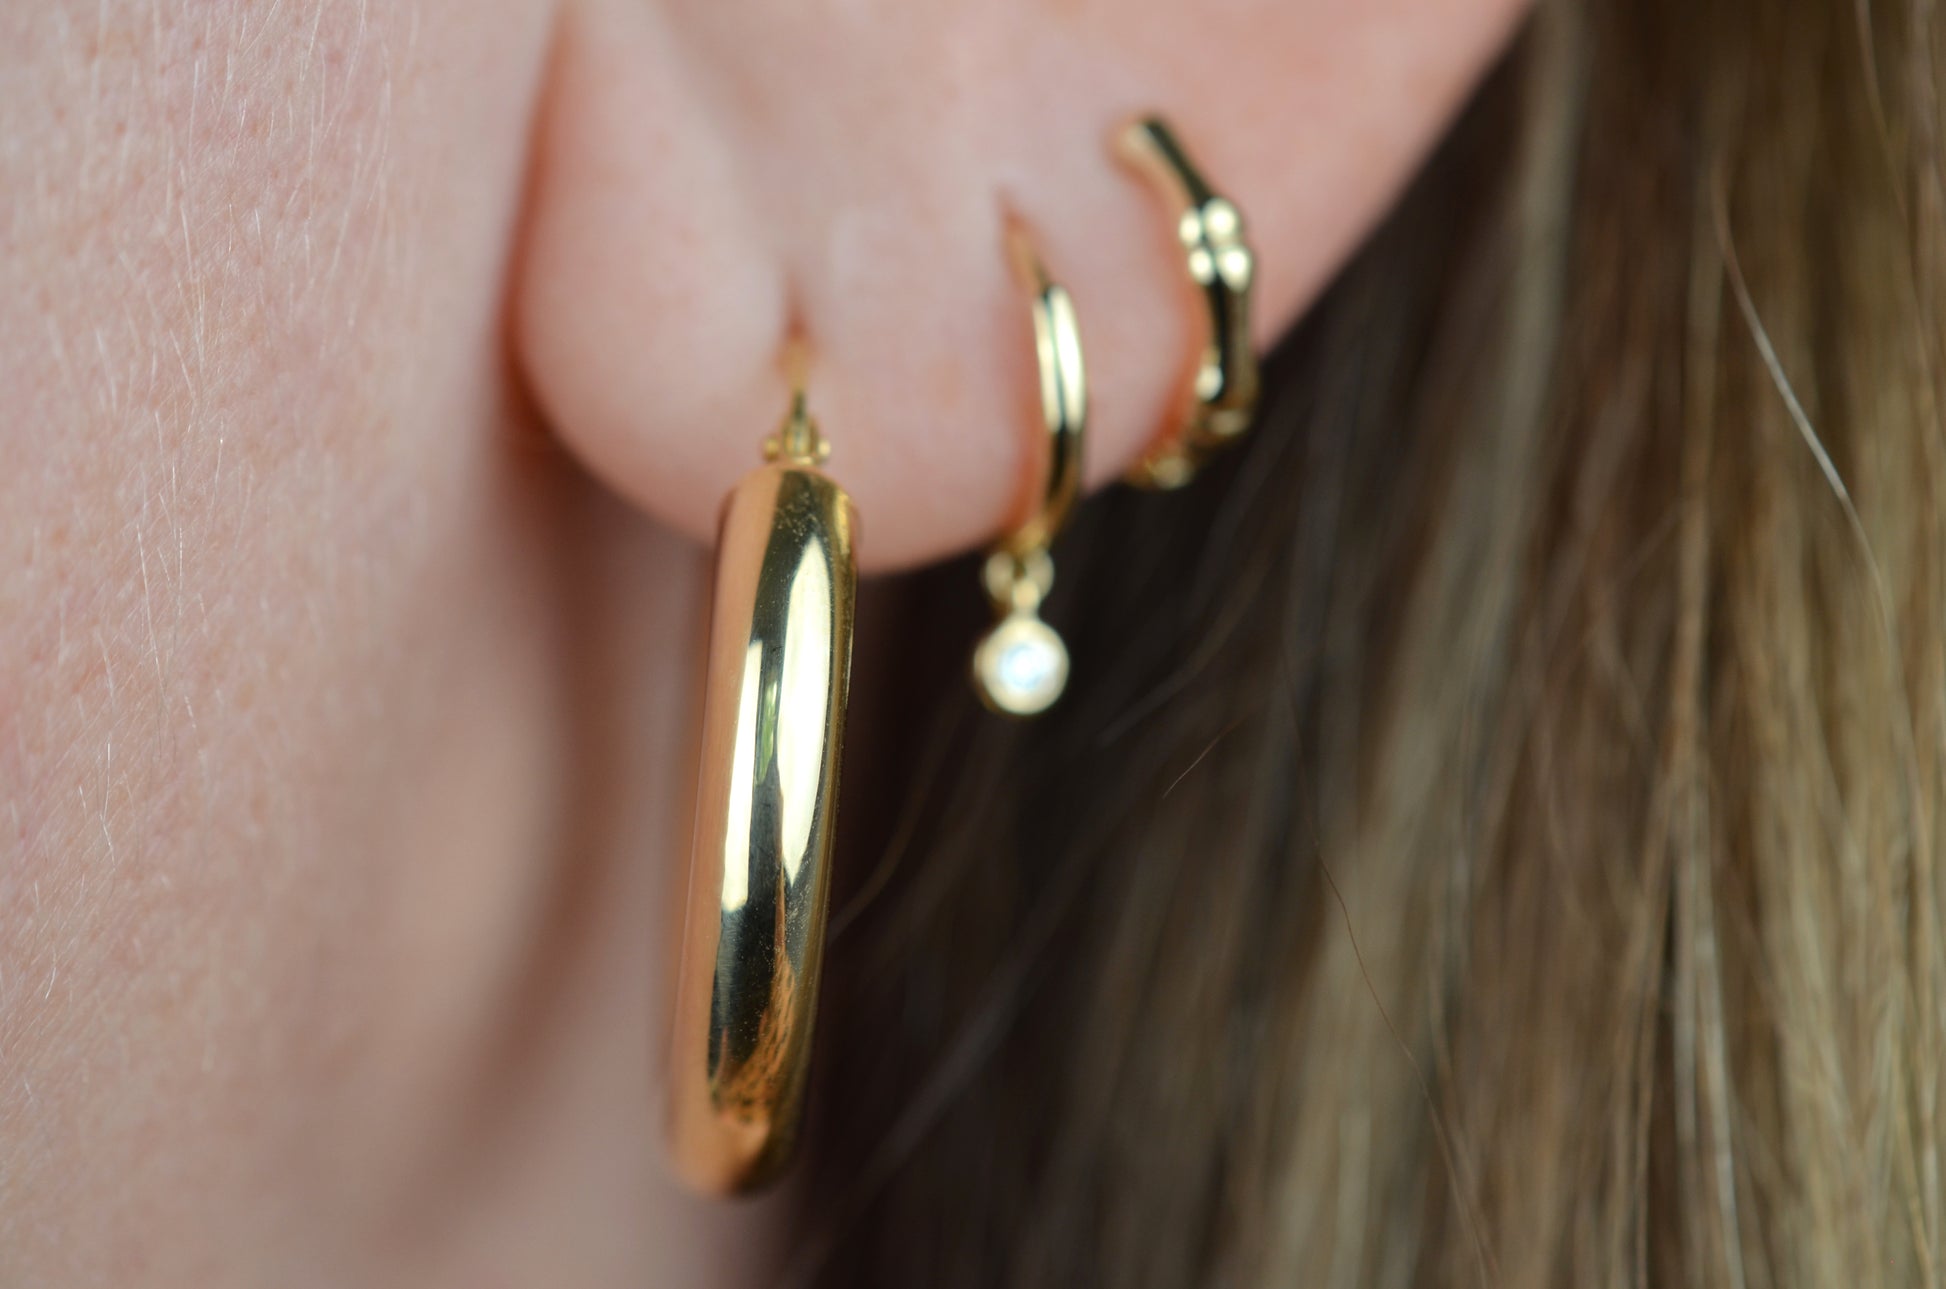 the featured hoops are shown on a caucasian model's first lobe piercing. slightly out of focus are a snug gold hoop with dangling diamond in the second piercing, a snug gold hoop stylized as bamboo in the third piercing.